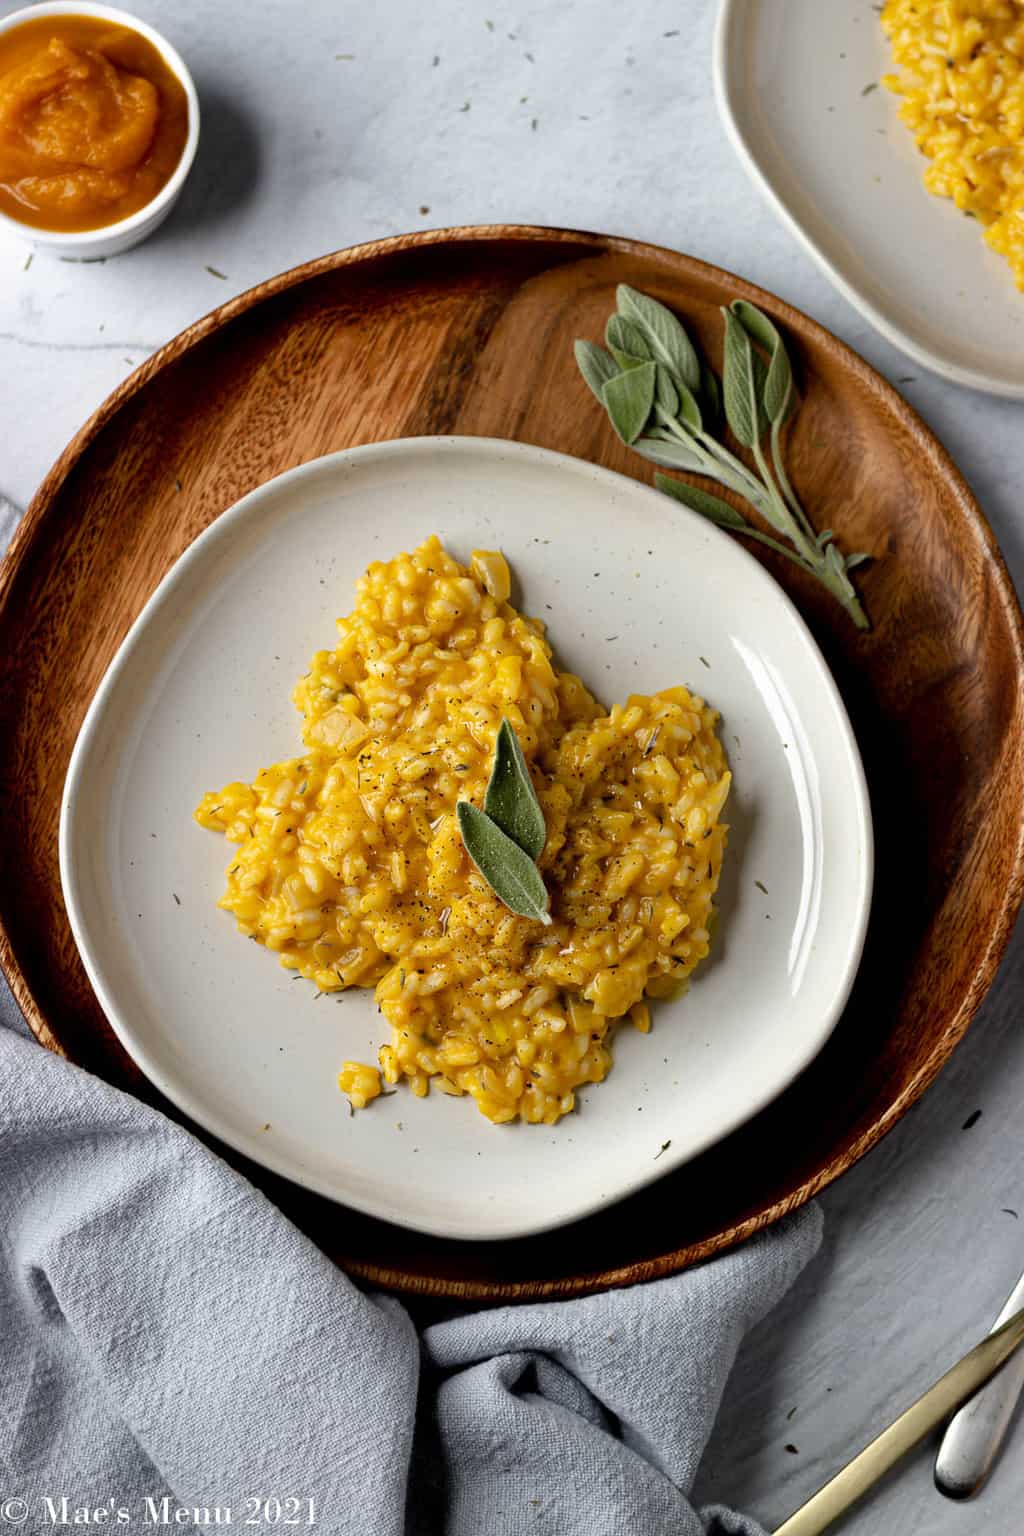 A serving of pumpkin risotto on a dish surrounded by herbs, silverware, and a small dish of pumpkin